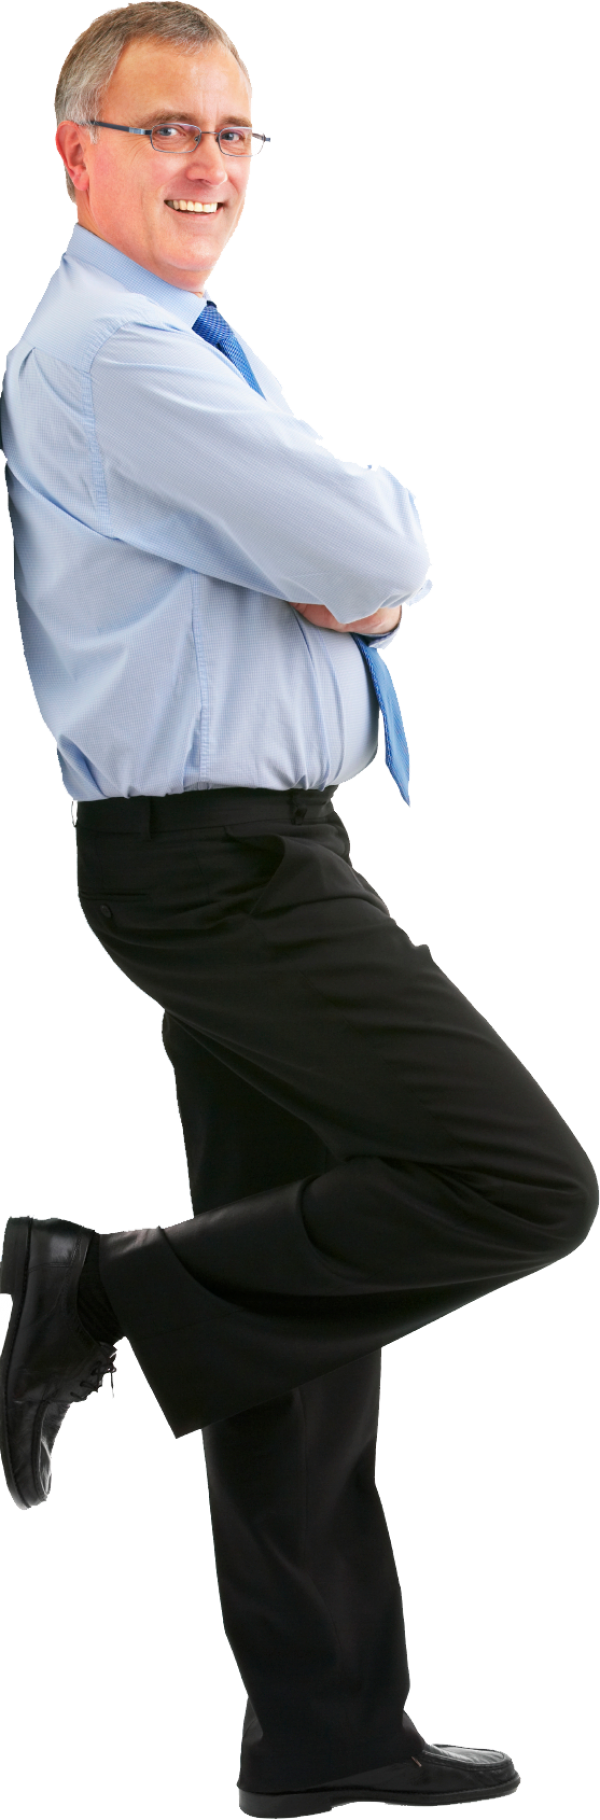 Business Man Background PNG Image